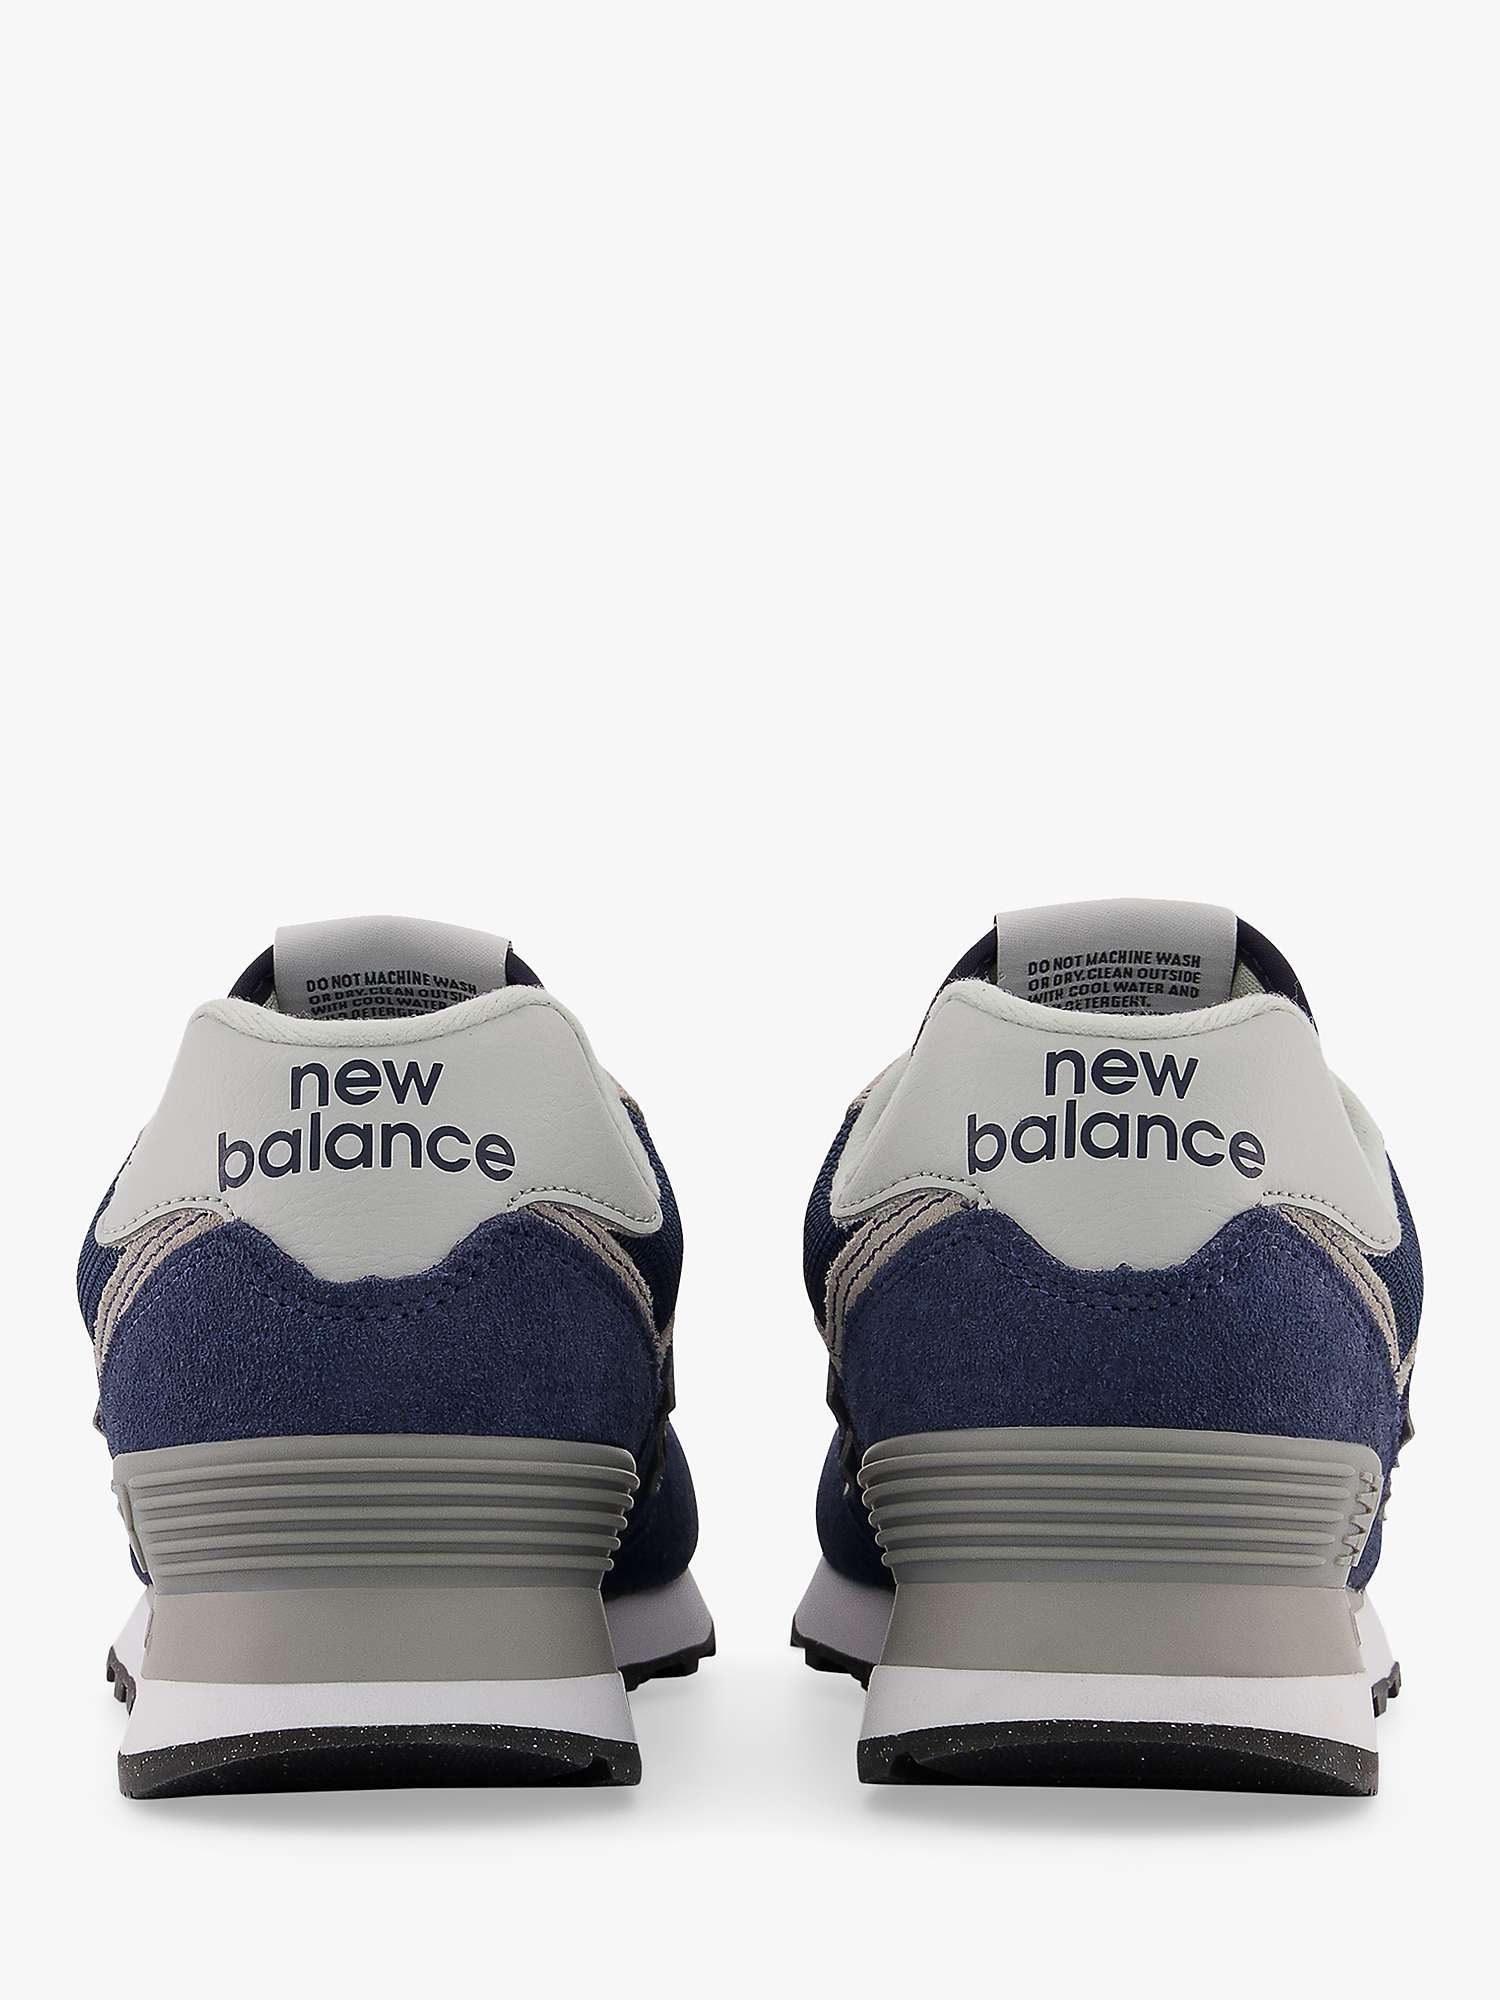 Buy New Balance 574v3 Trainers, Navy Online at johnlewis.com